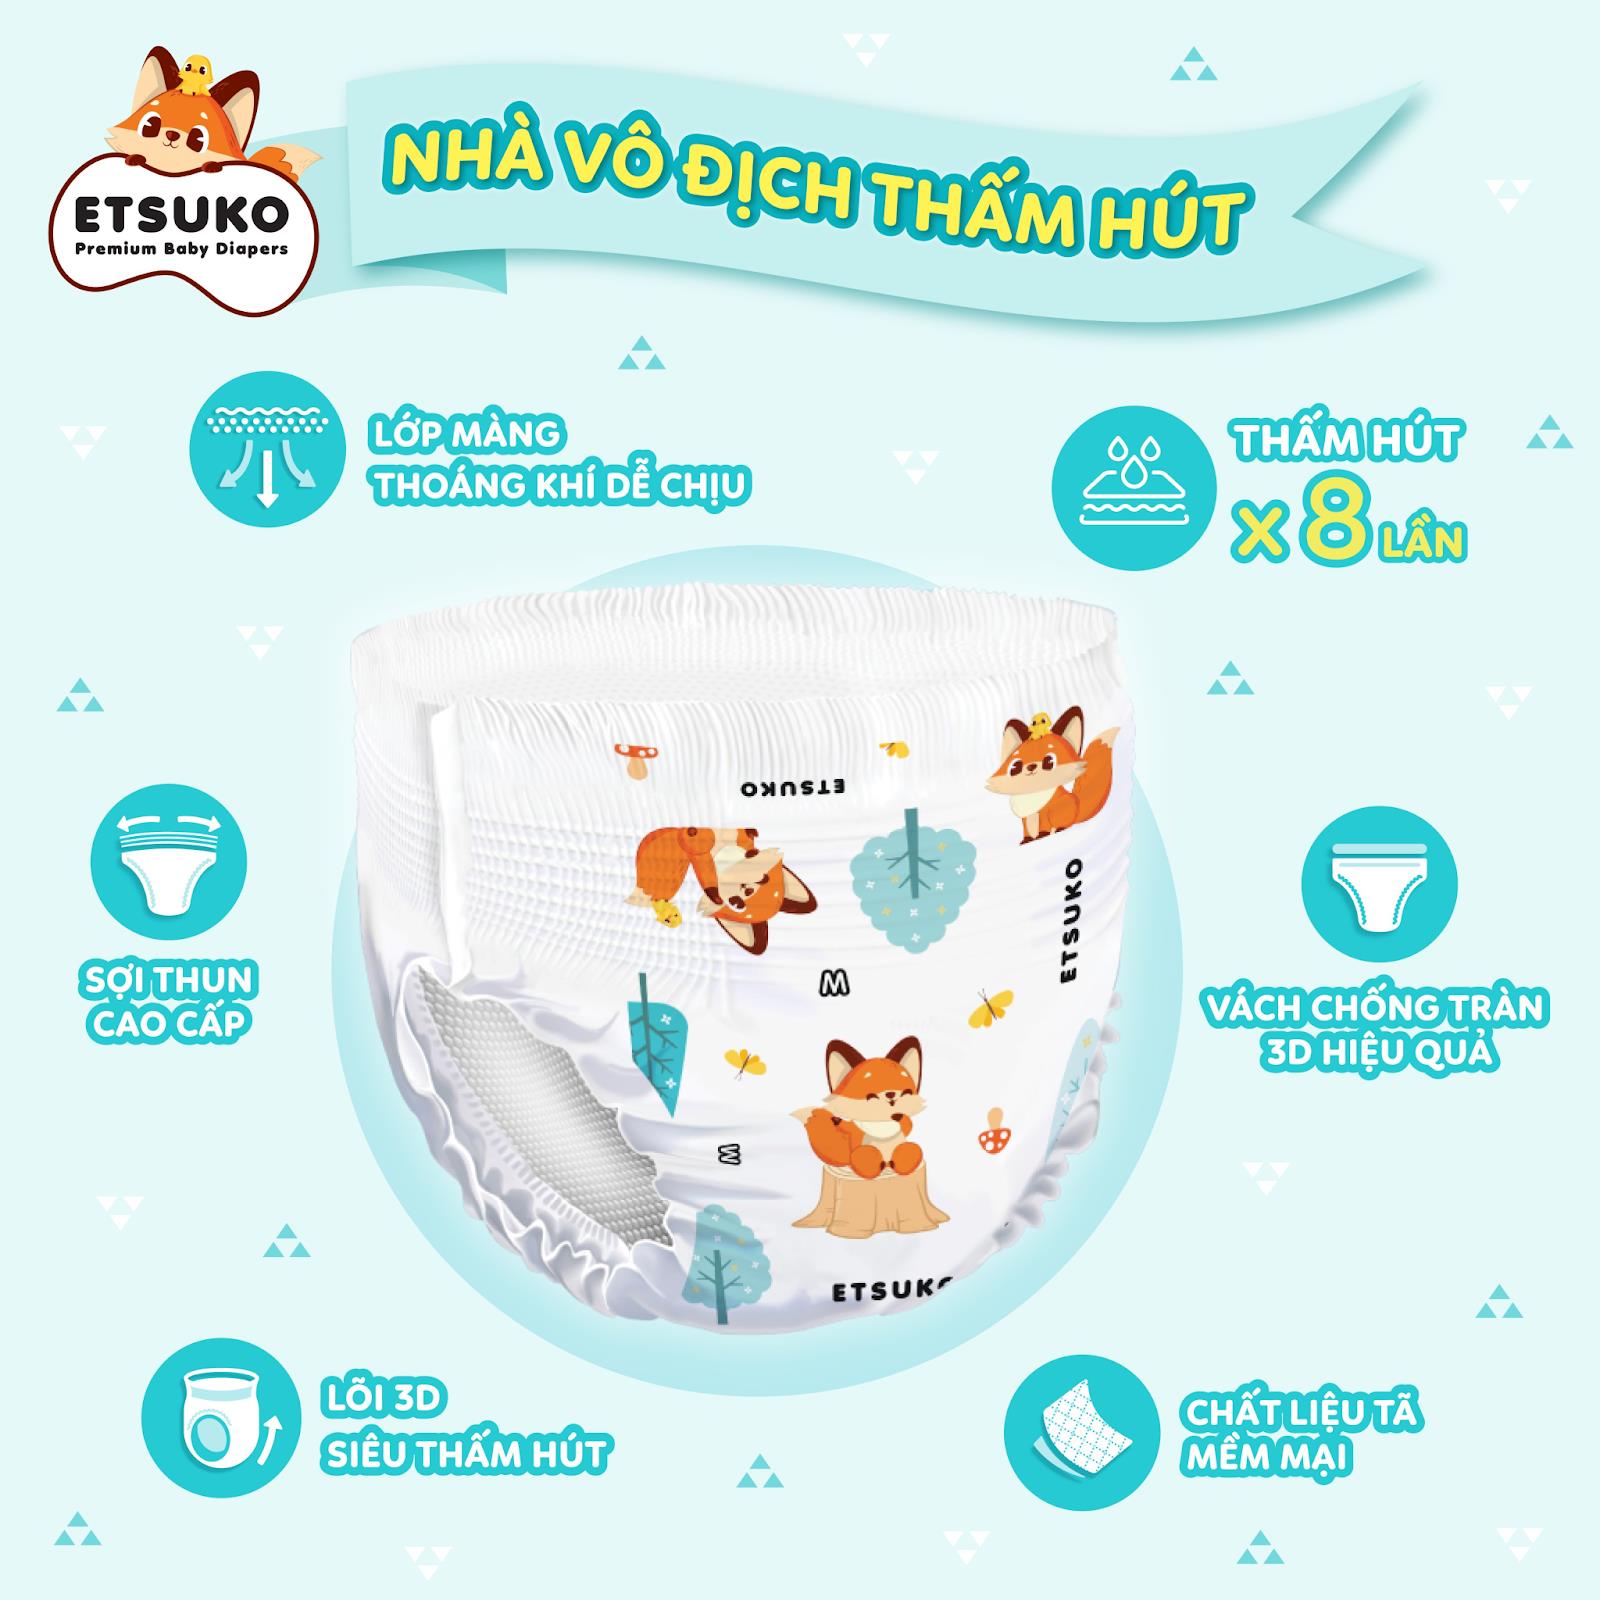 ETSUKO diapers officially entered the Vietnamese market with great deals - Photo 1.